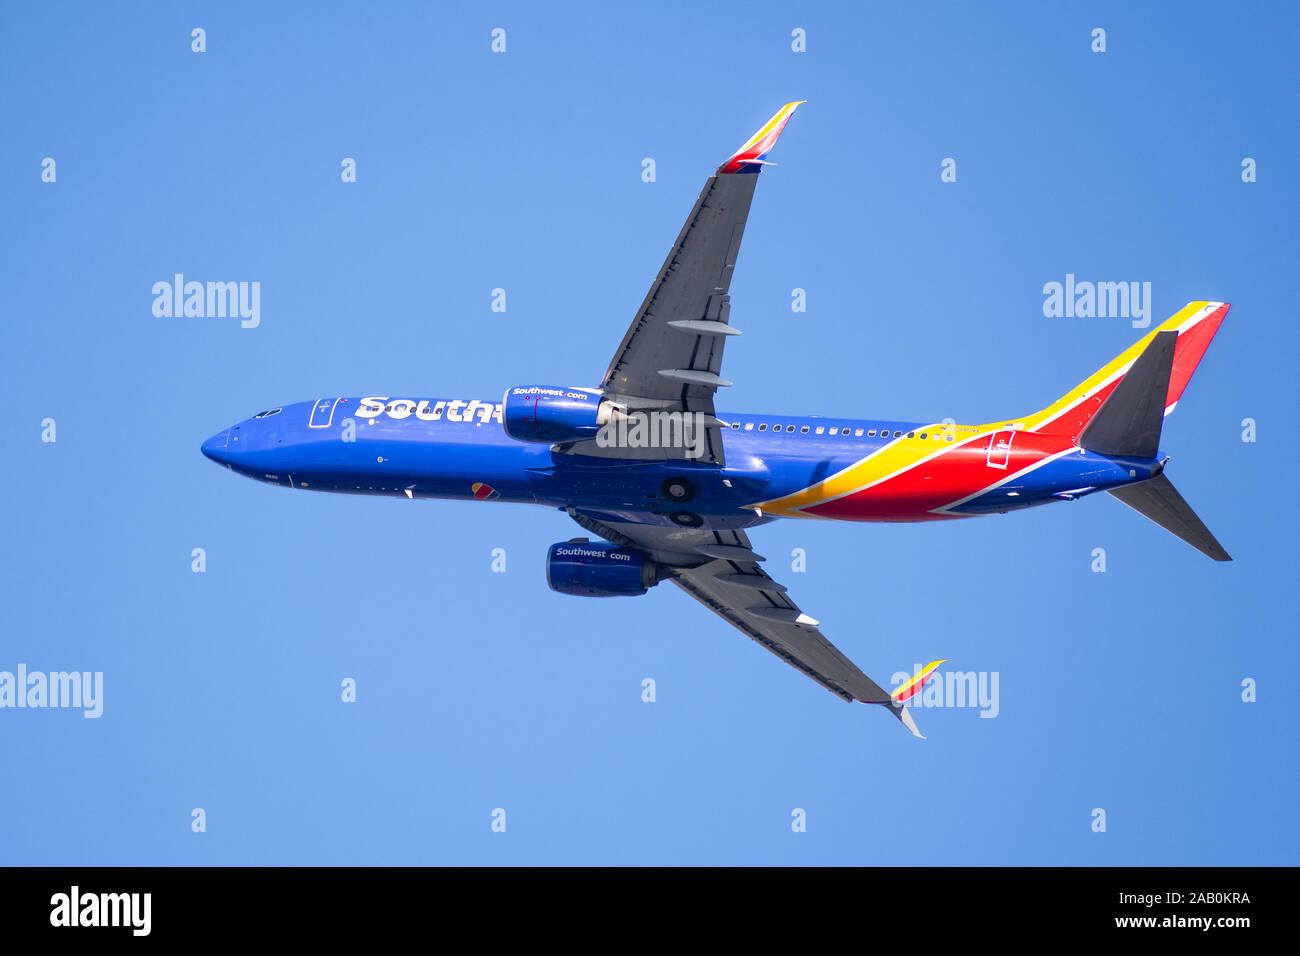 Nov 21, 2019 San Jose / CA / USA - Southwest Airlines aircraft in flight; the Southwest Airlines heart Logo visible on the airplanes' underbelly; blue Stock Photo